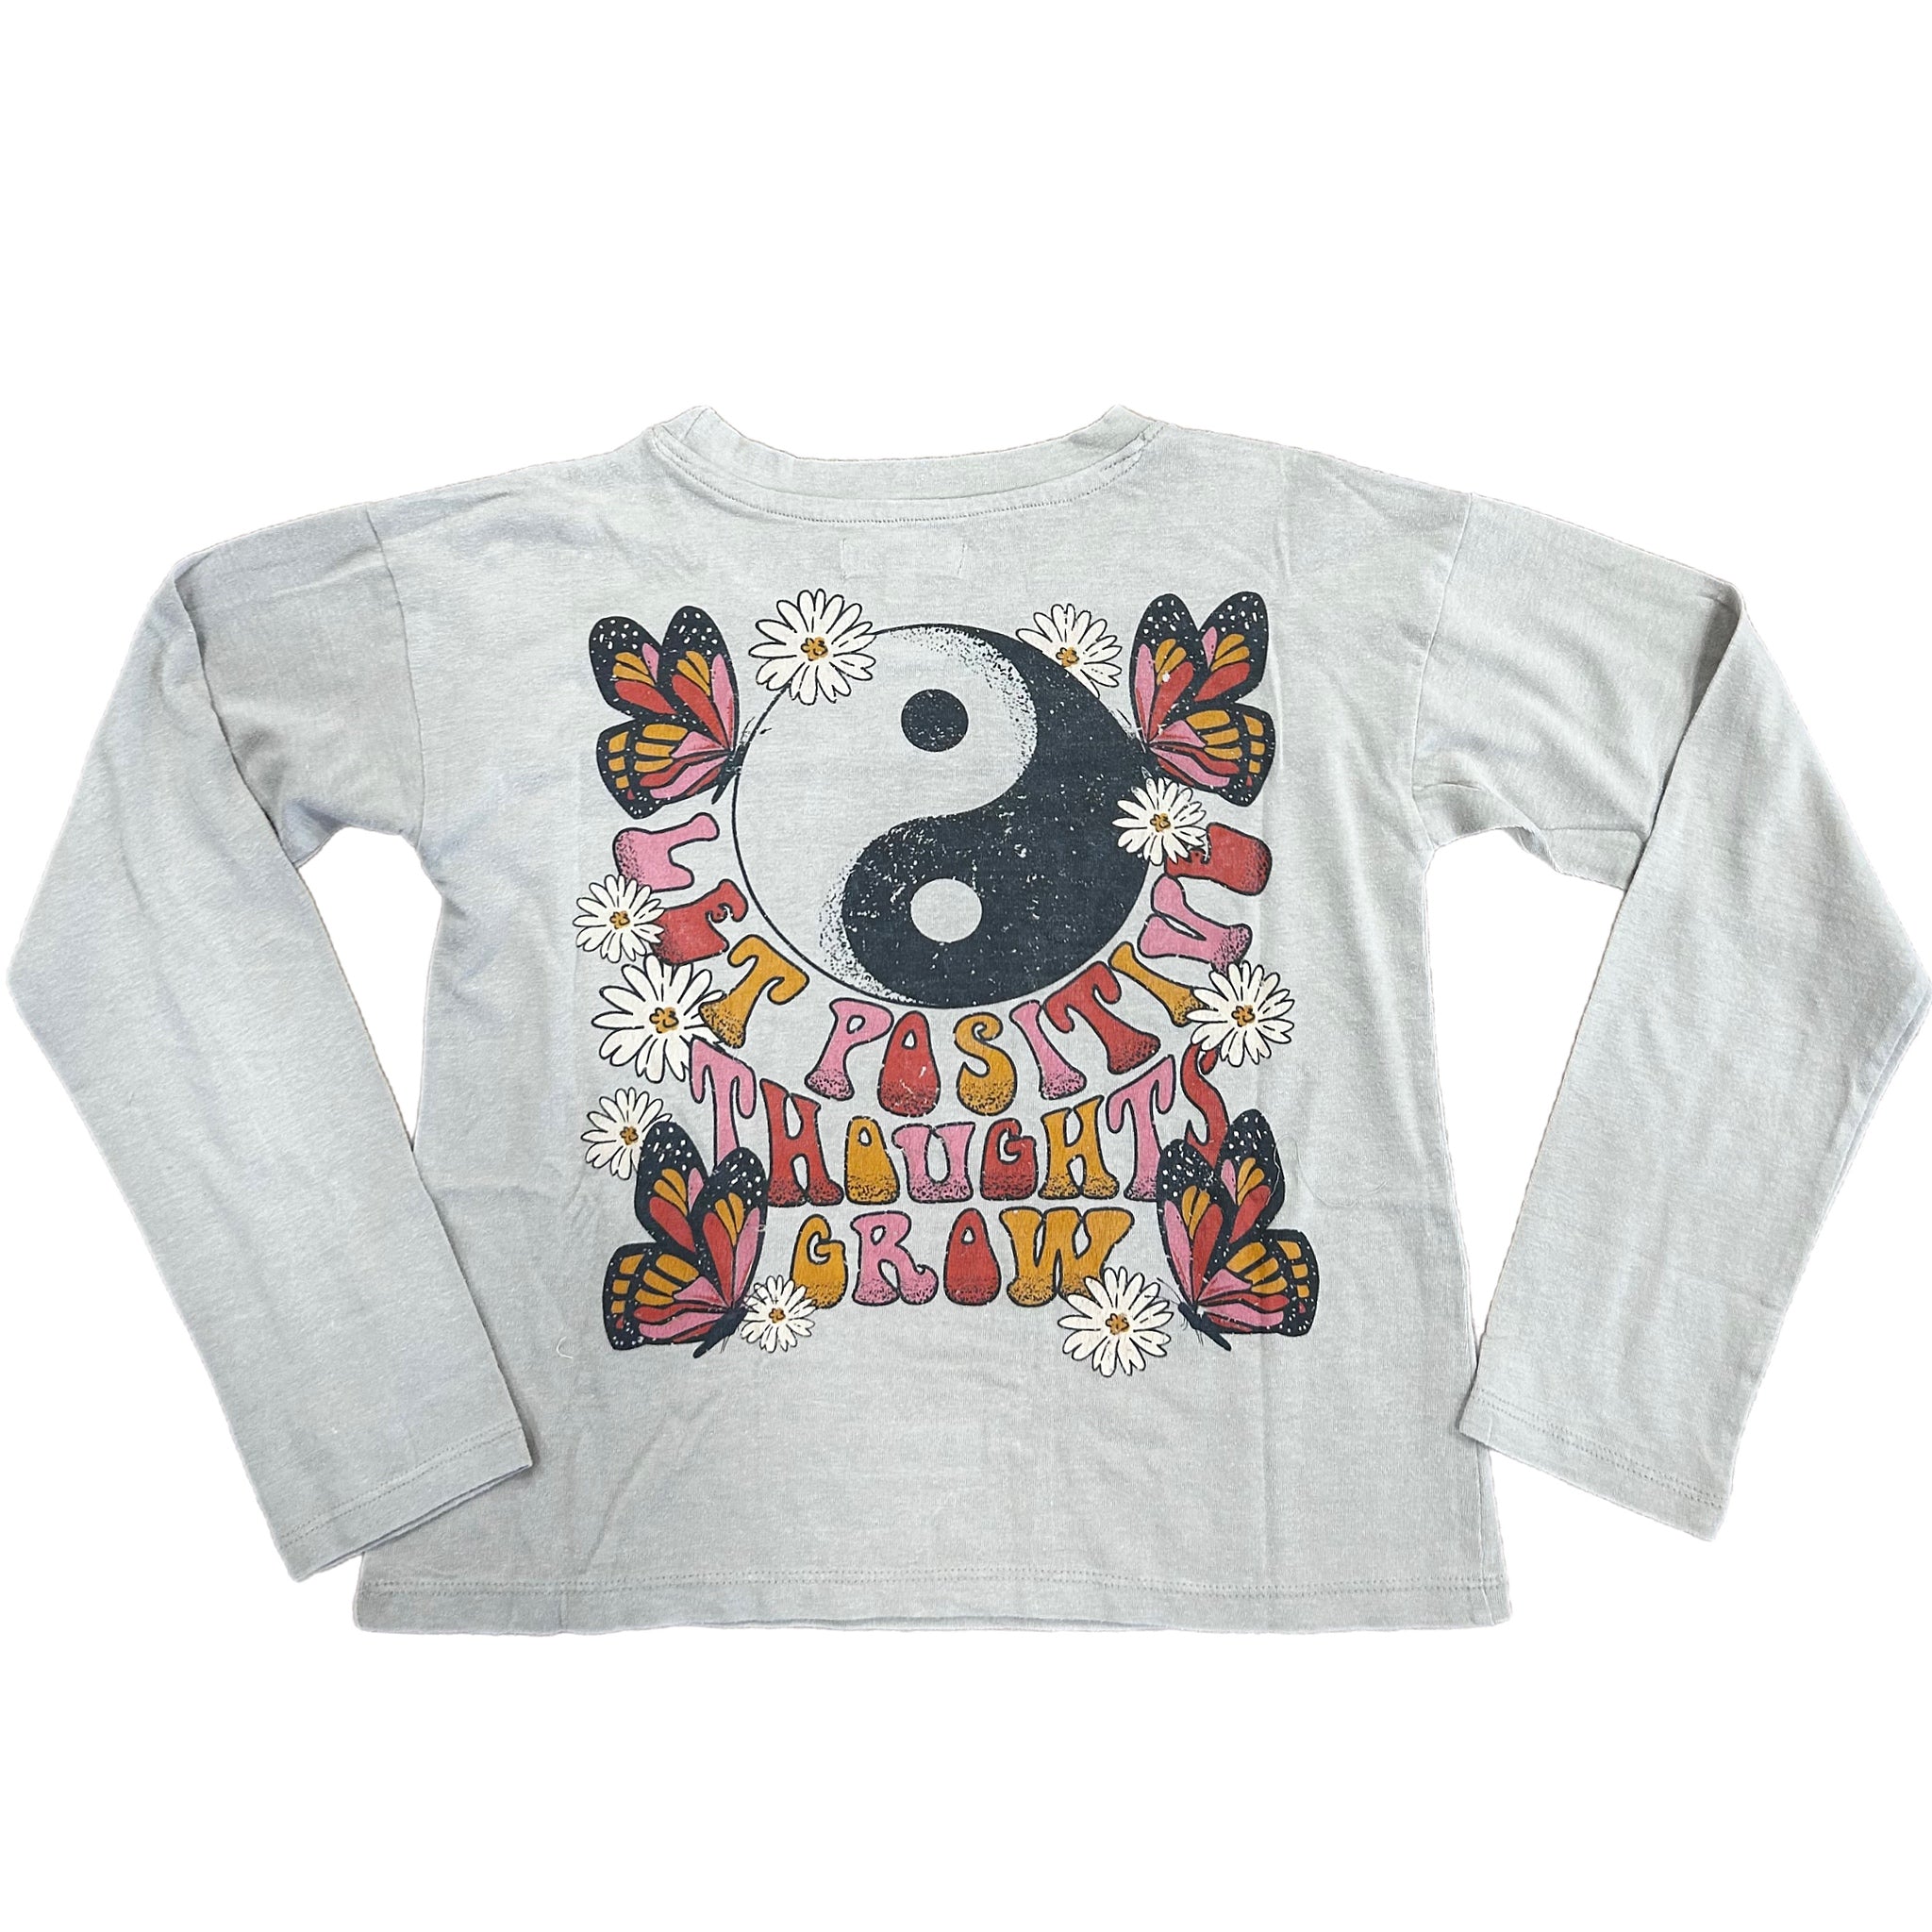 TWEEN POSITIVE VIBES YING YANG BUTTERFLY RETROS WASHED GRAPHIC TOP